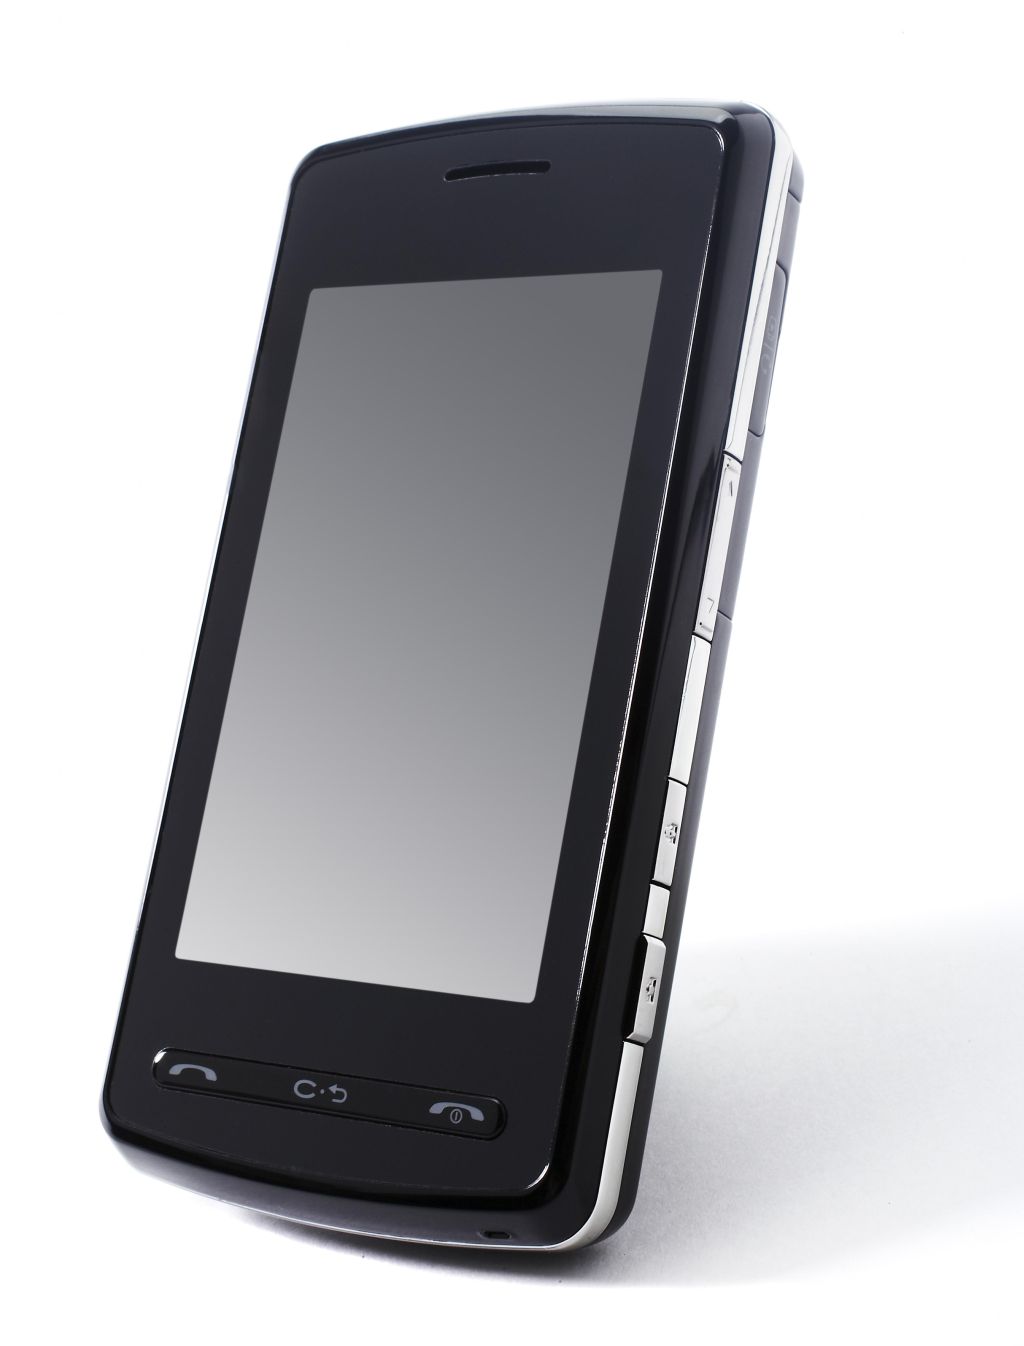 touch screen phone